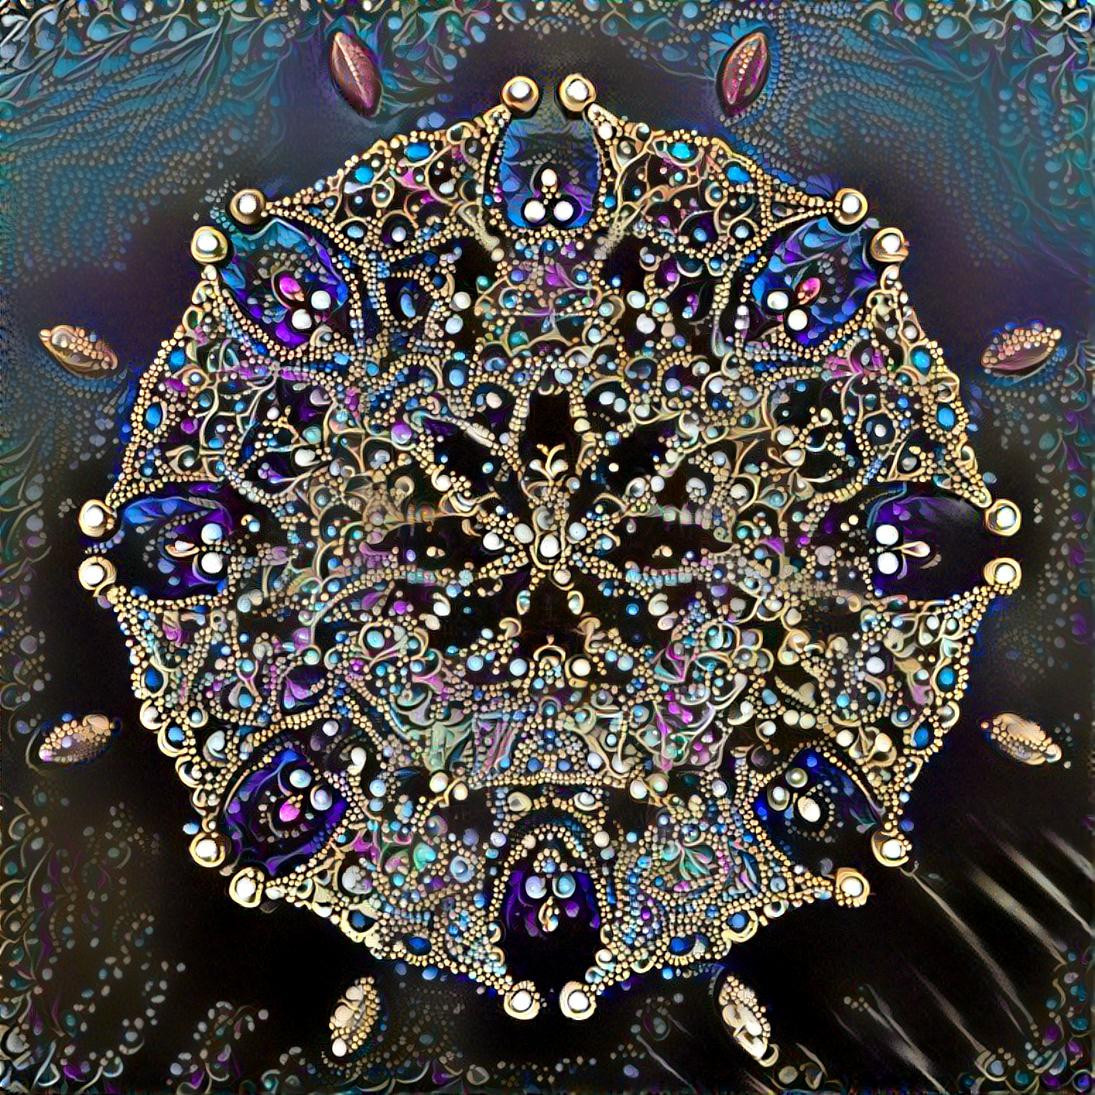 Mandelbulber picture by Adrian Morgan i rendered it in MD then DDG